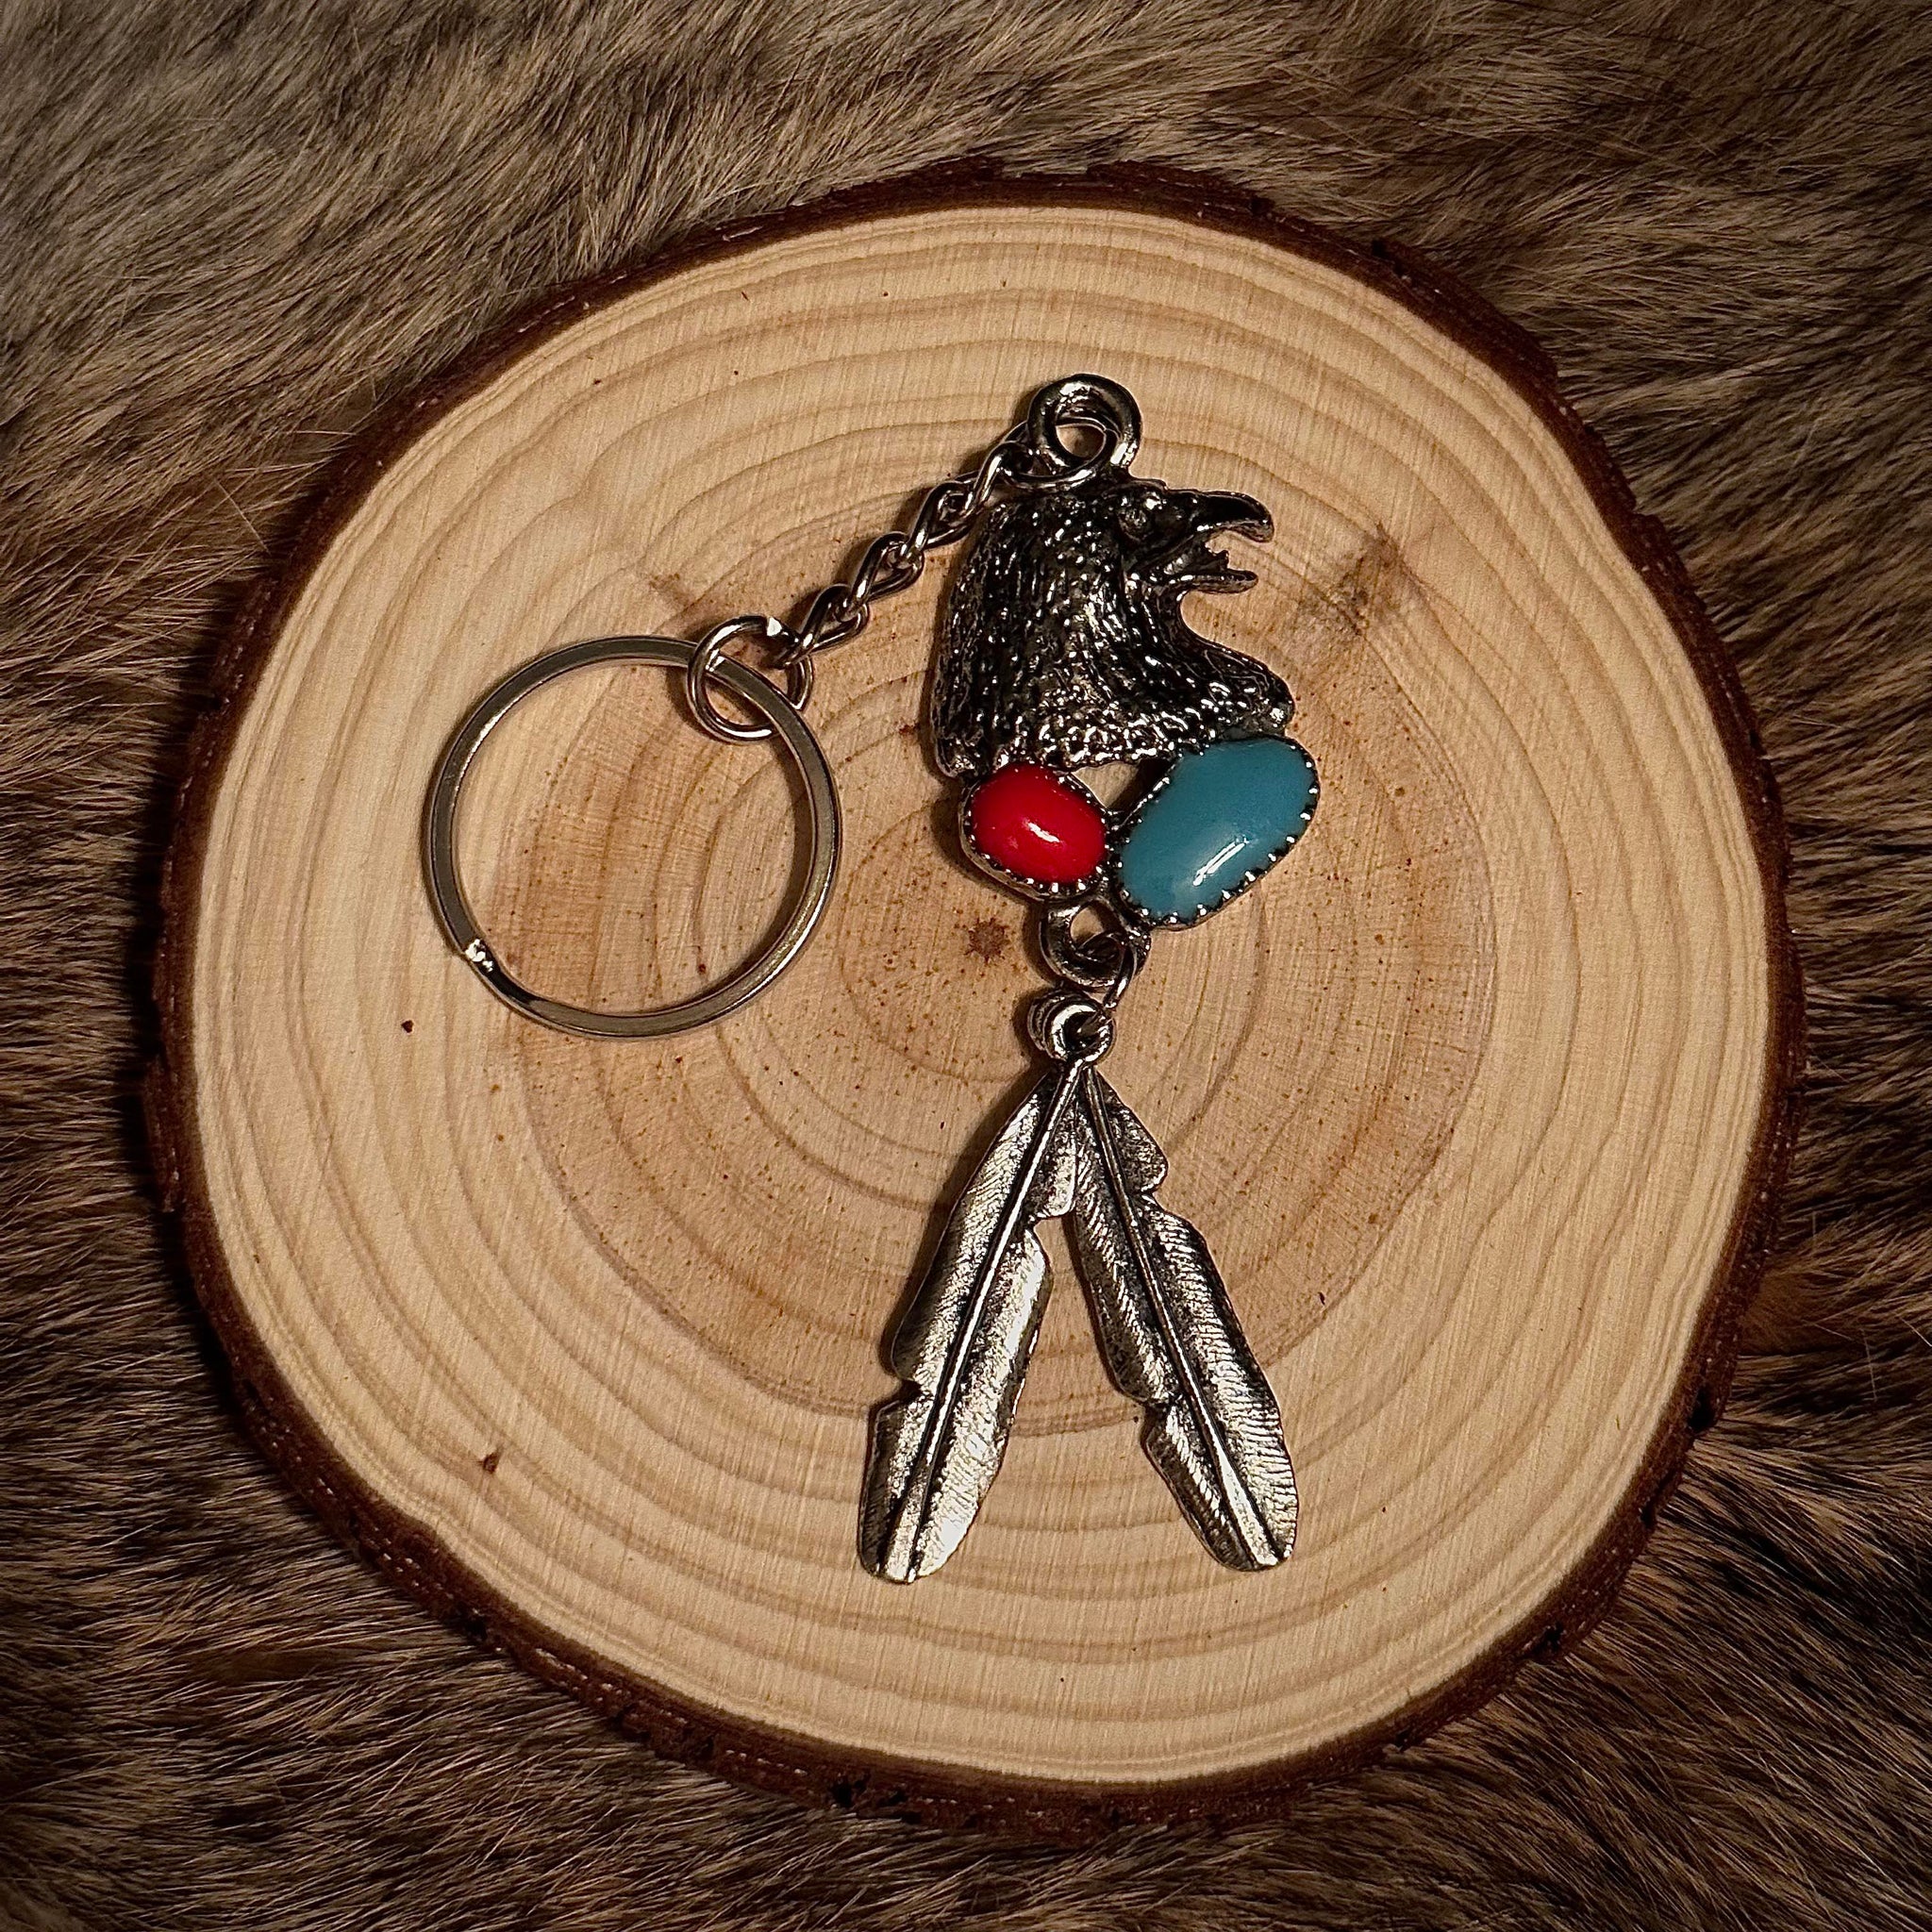 "Eagle" decorative key ring / charm (DELIVERY INCLUDED)